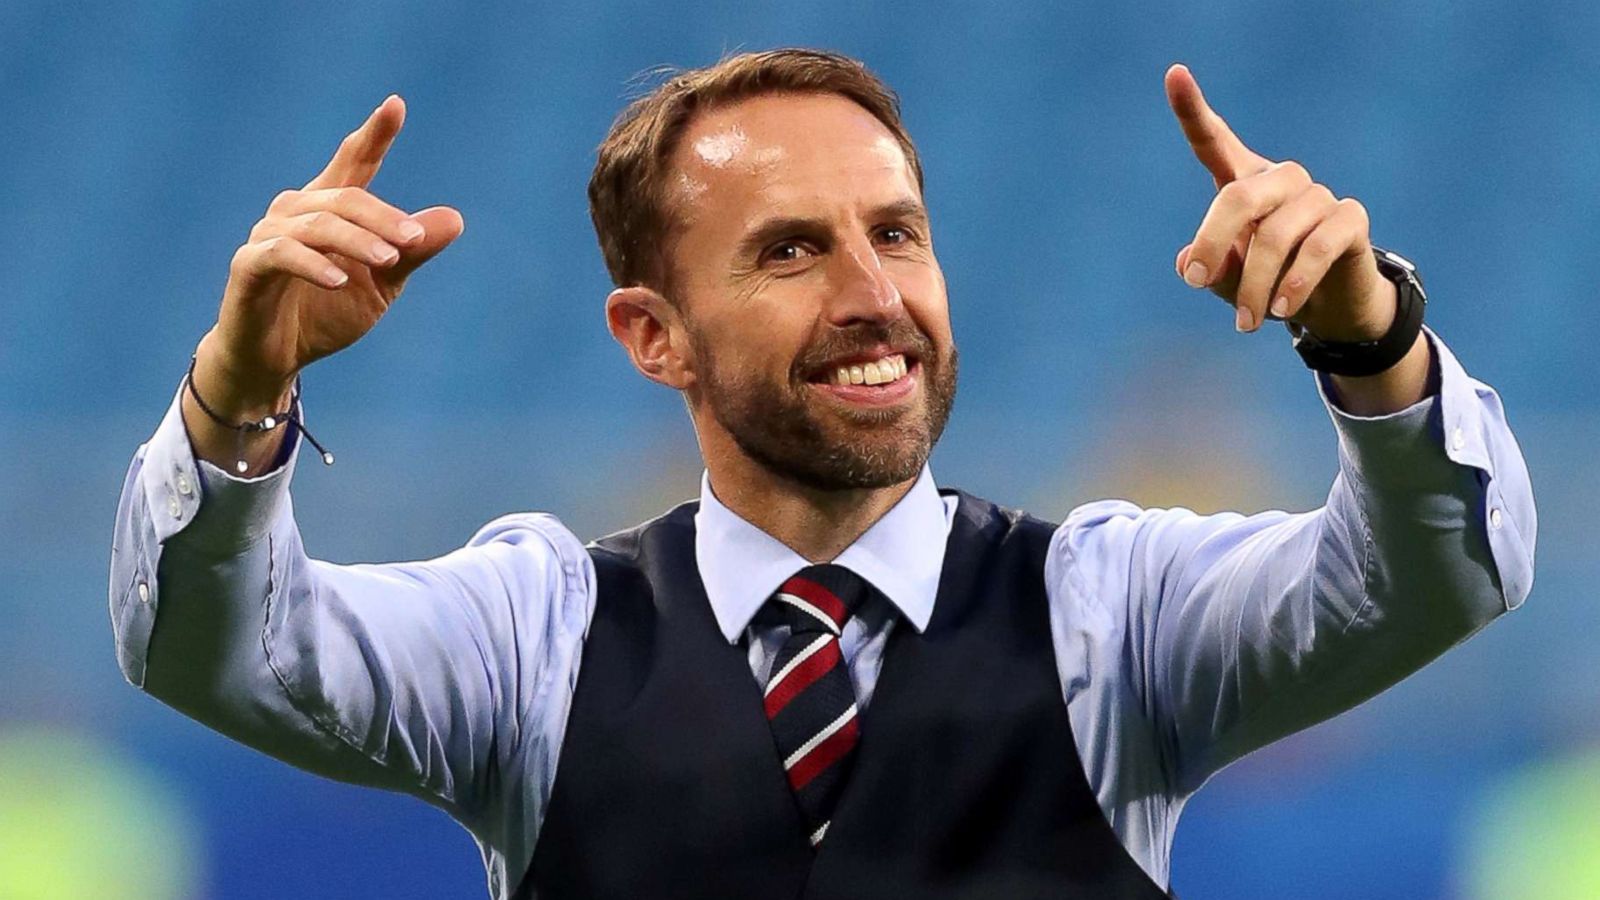 PHOTO: Gareth Southgate, Manager of England, celebrates at the final whistle following victory during the 2018 FIFA World Cup match between Sweden and England, July 7, 2018, in Samara, Russia.